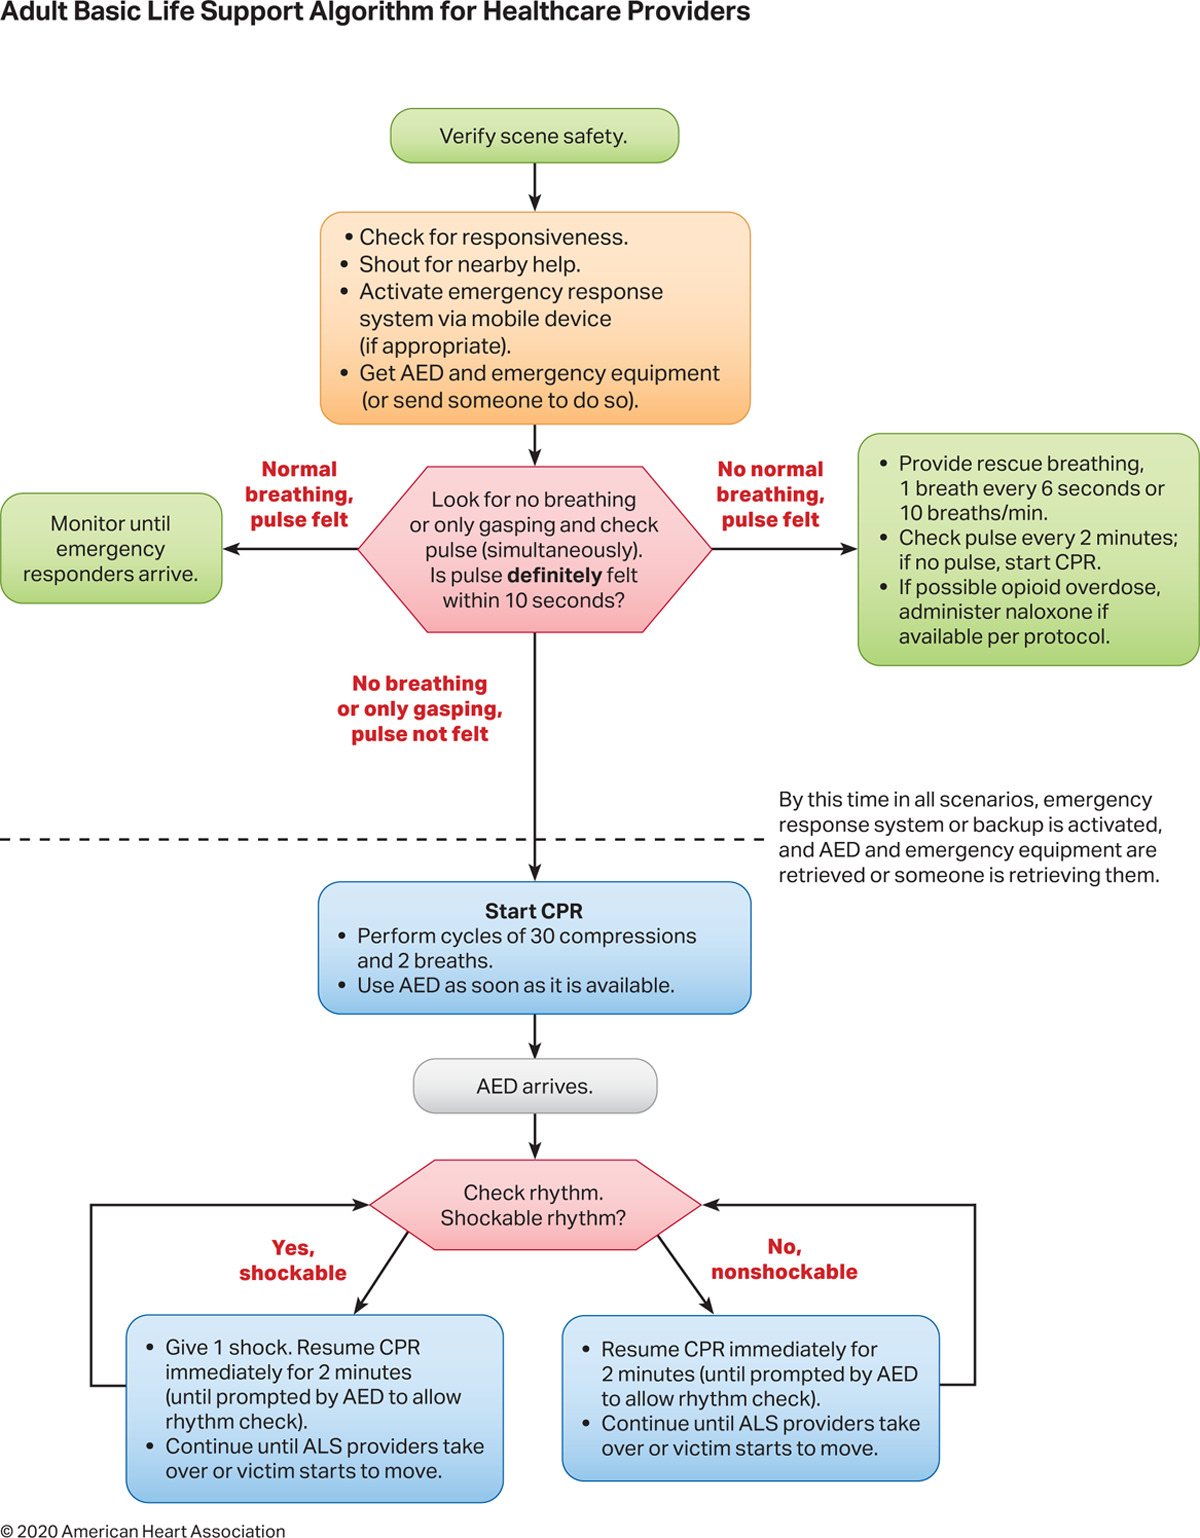 <p>Adult Basic Life Support Algorithm for Healthcare Providers 2020